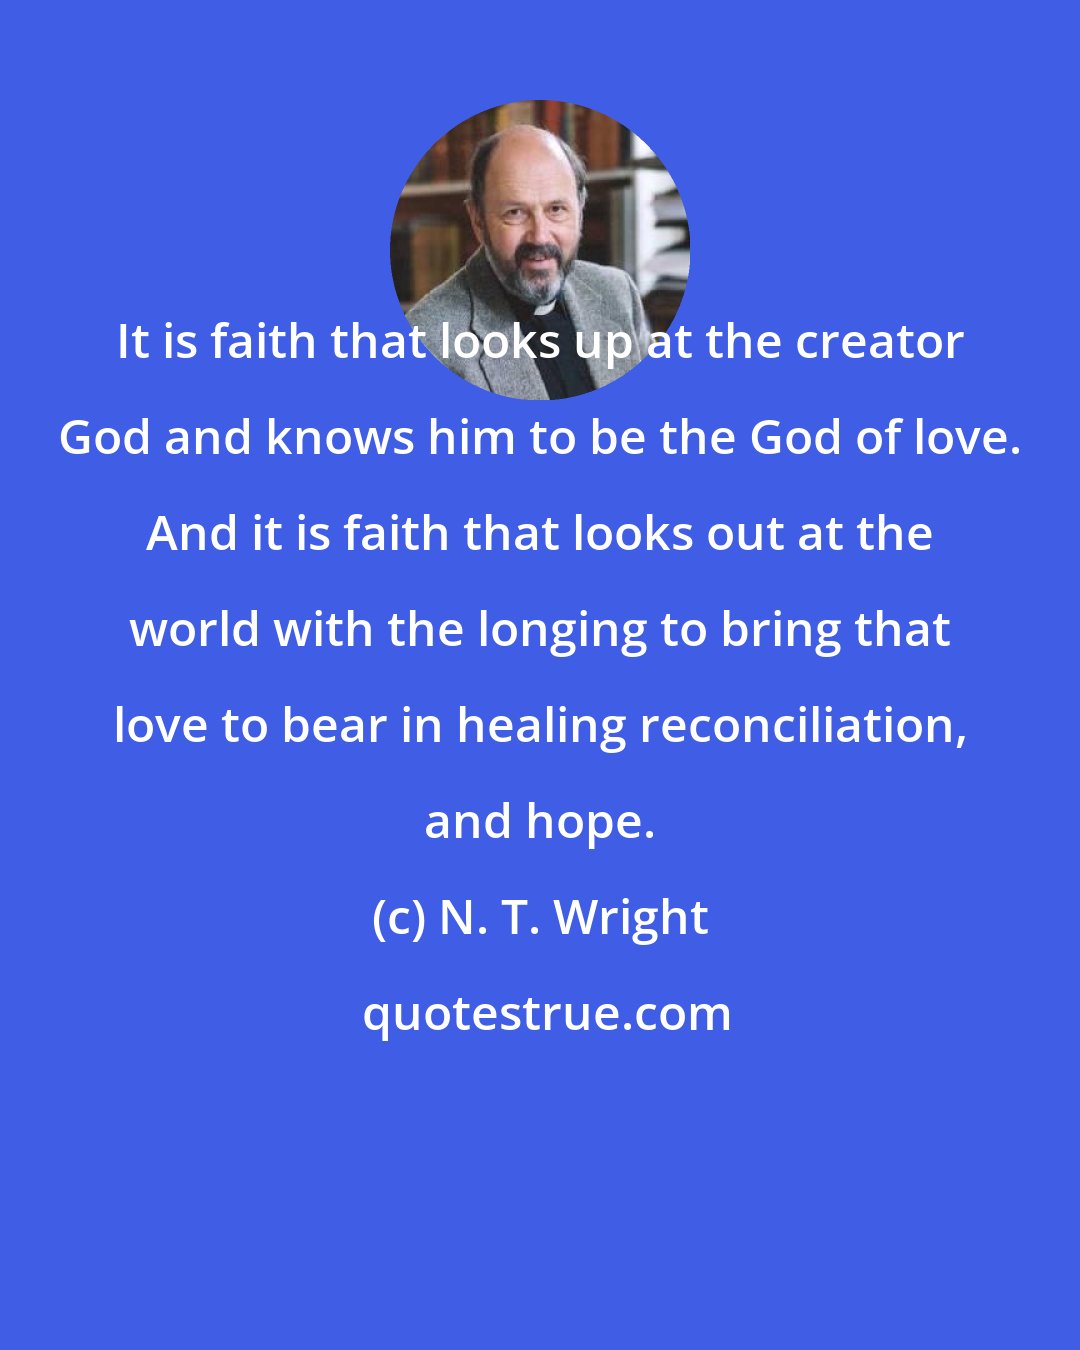 N. T. Wright: It is faith that looks up at the creator God and knows him to be the God of love. And it is faith that looks out at the world with the longing to bring that love to bear in healing reconciliation, and hope.